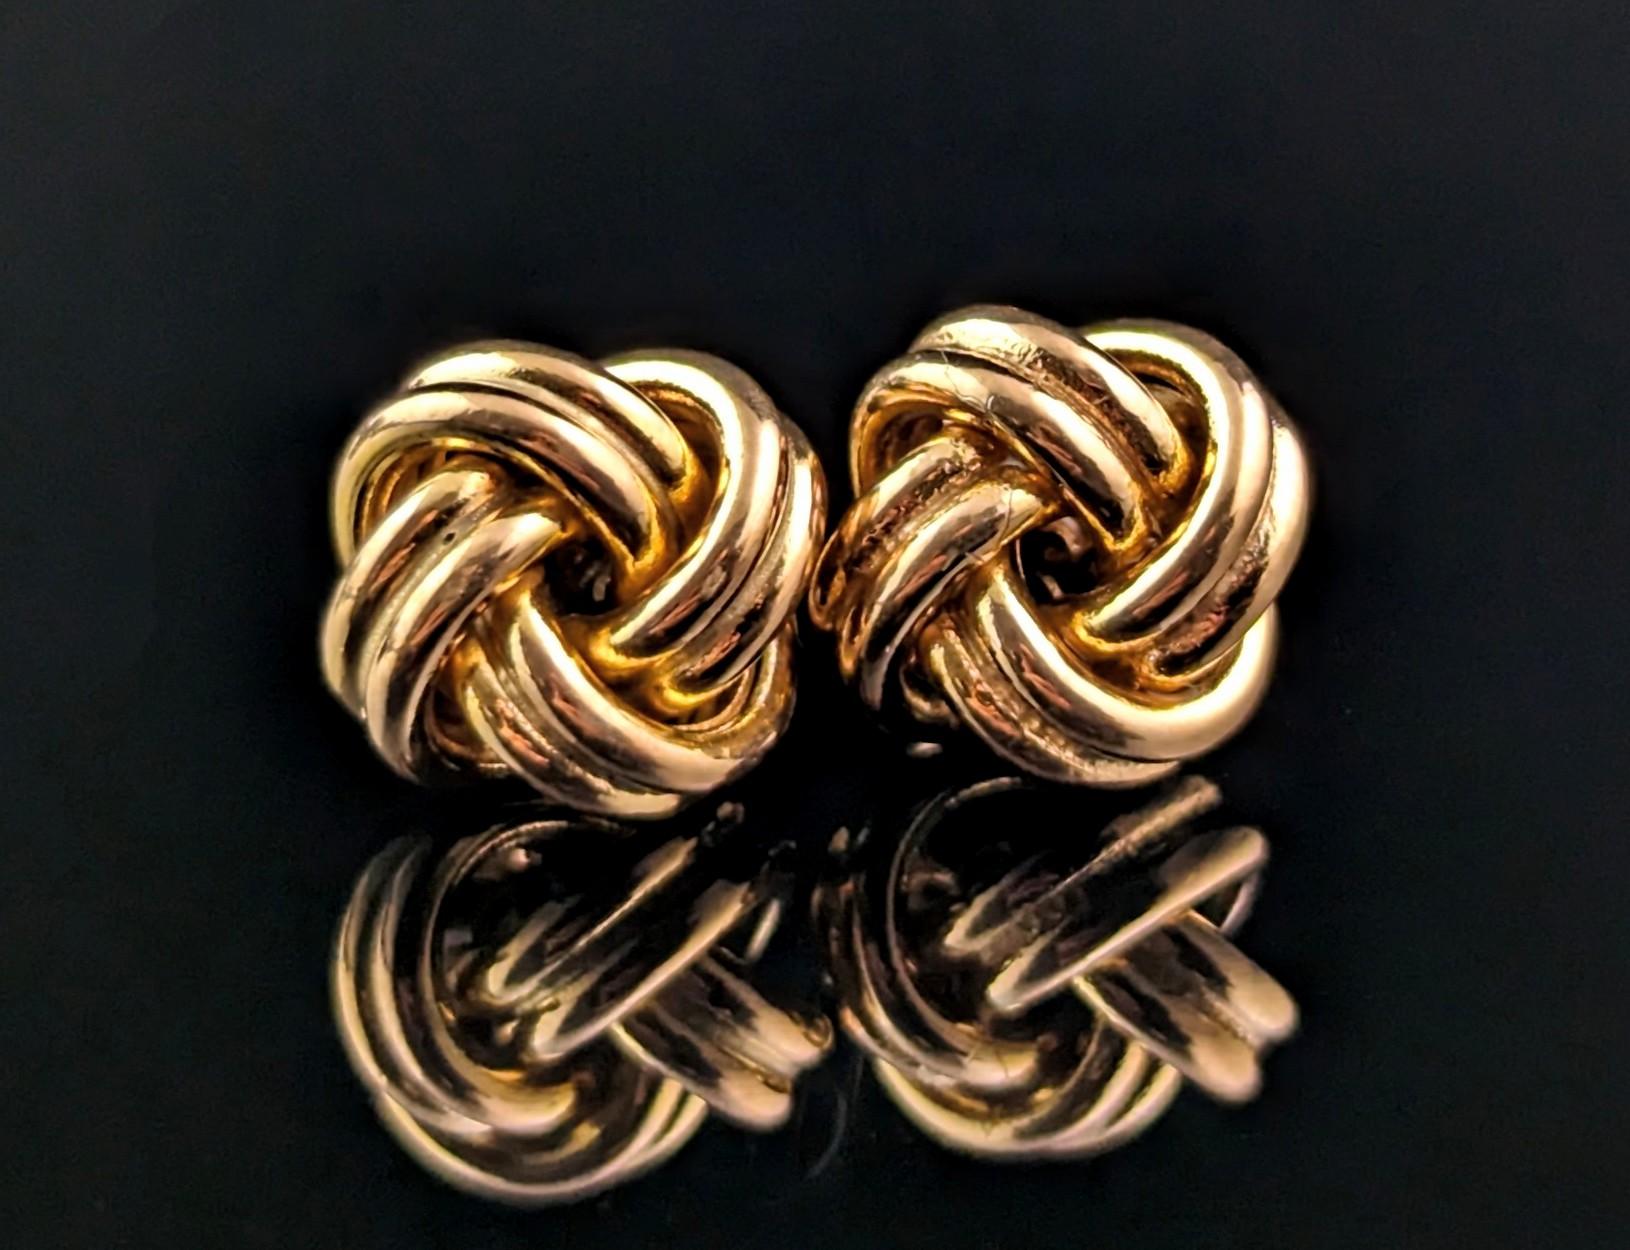 A lovely little chunky pair of vintage 9ct gold lovers knot earrings.

A design that has been loved and revered for centuries and with it's design rooted in the ever popular Victorian era lovers knot.

The lovers knot is said to represent the